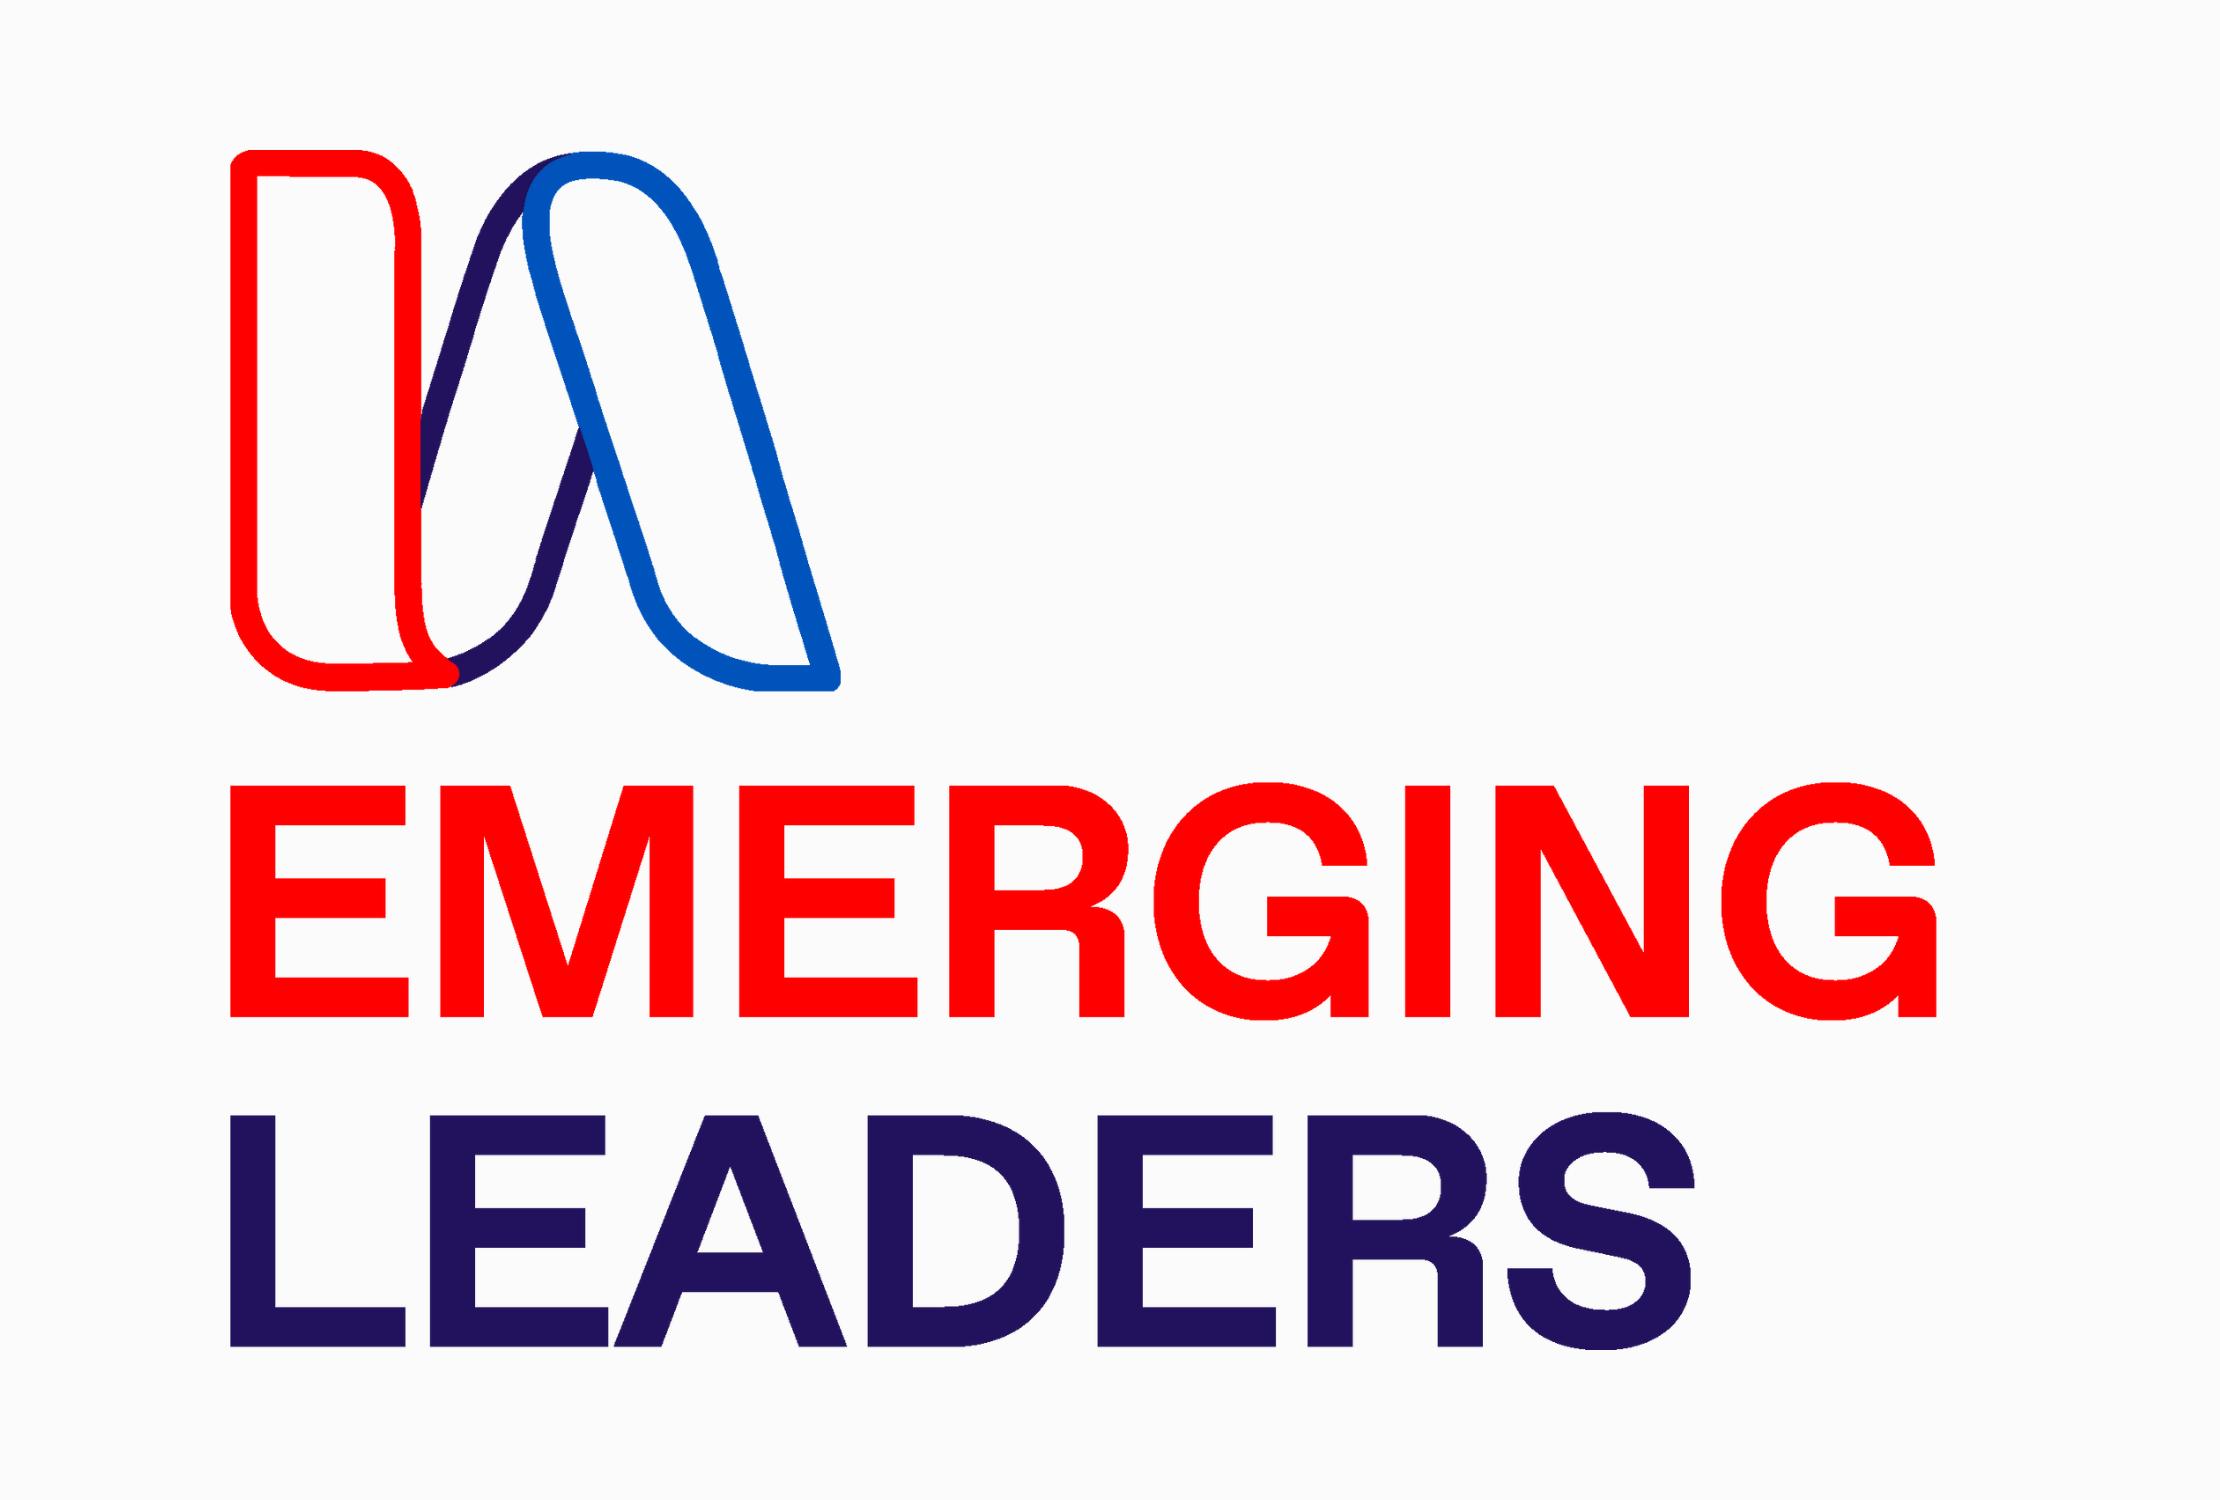 What is the Emerging Leaders Network?